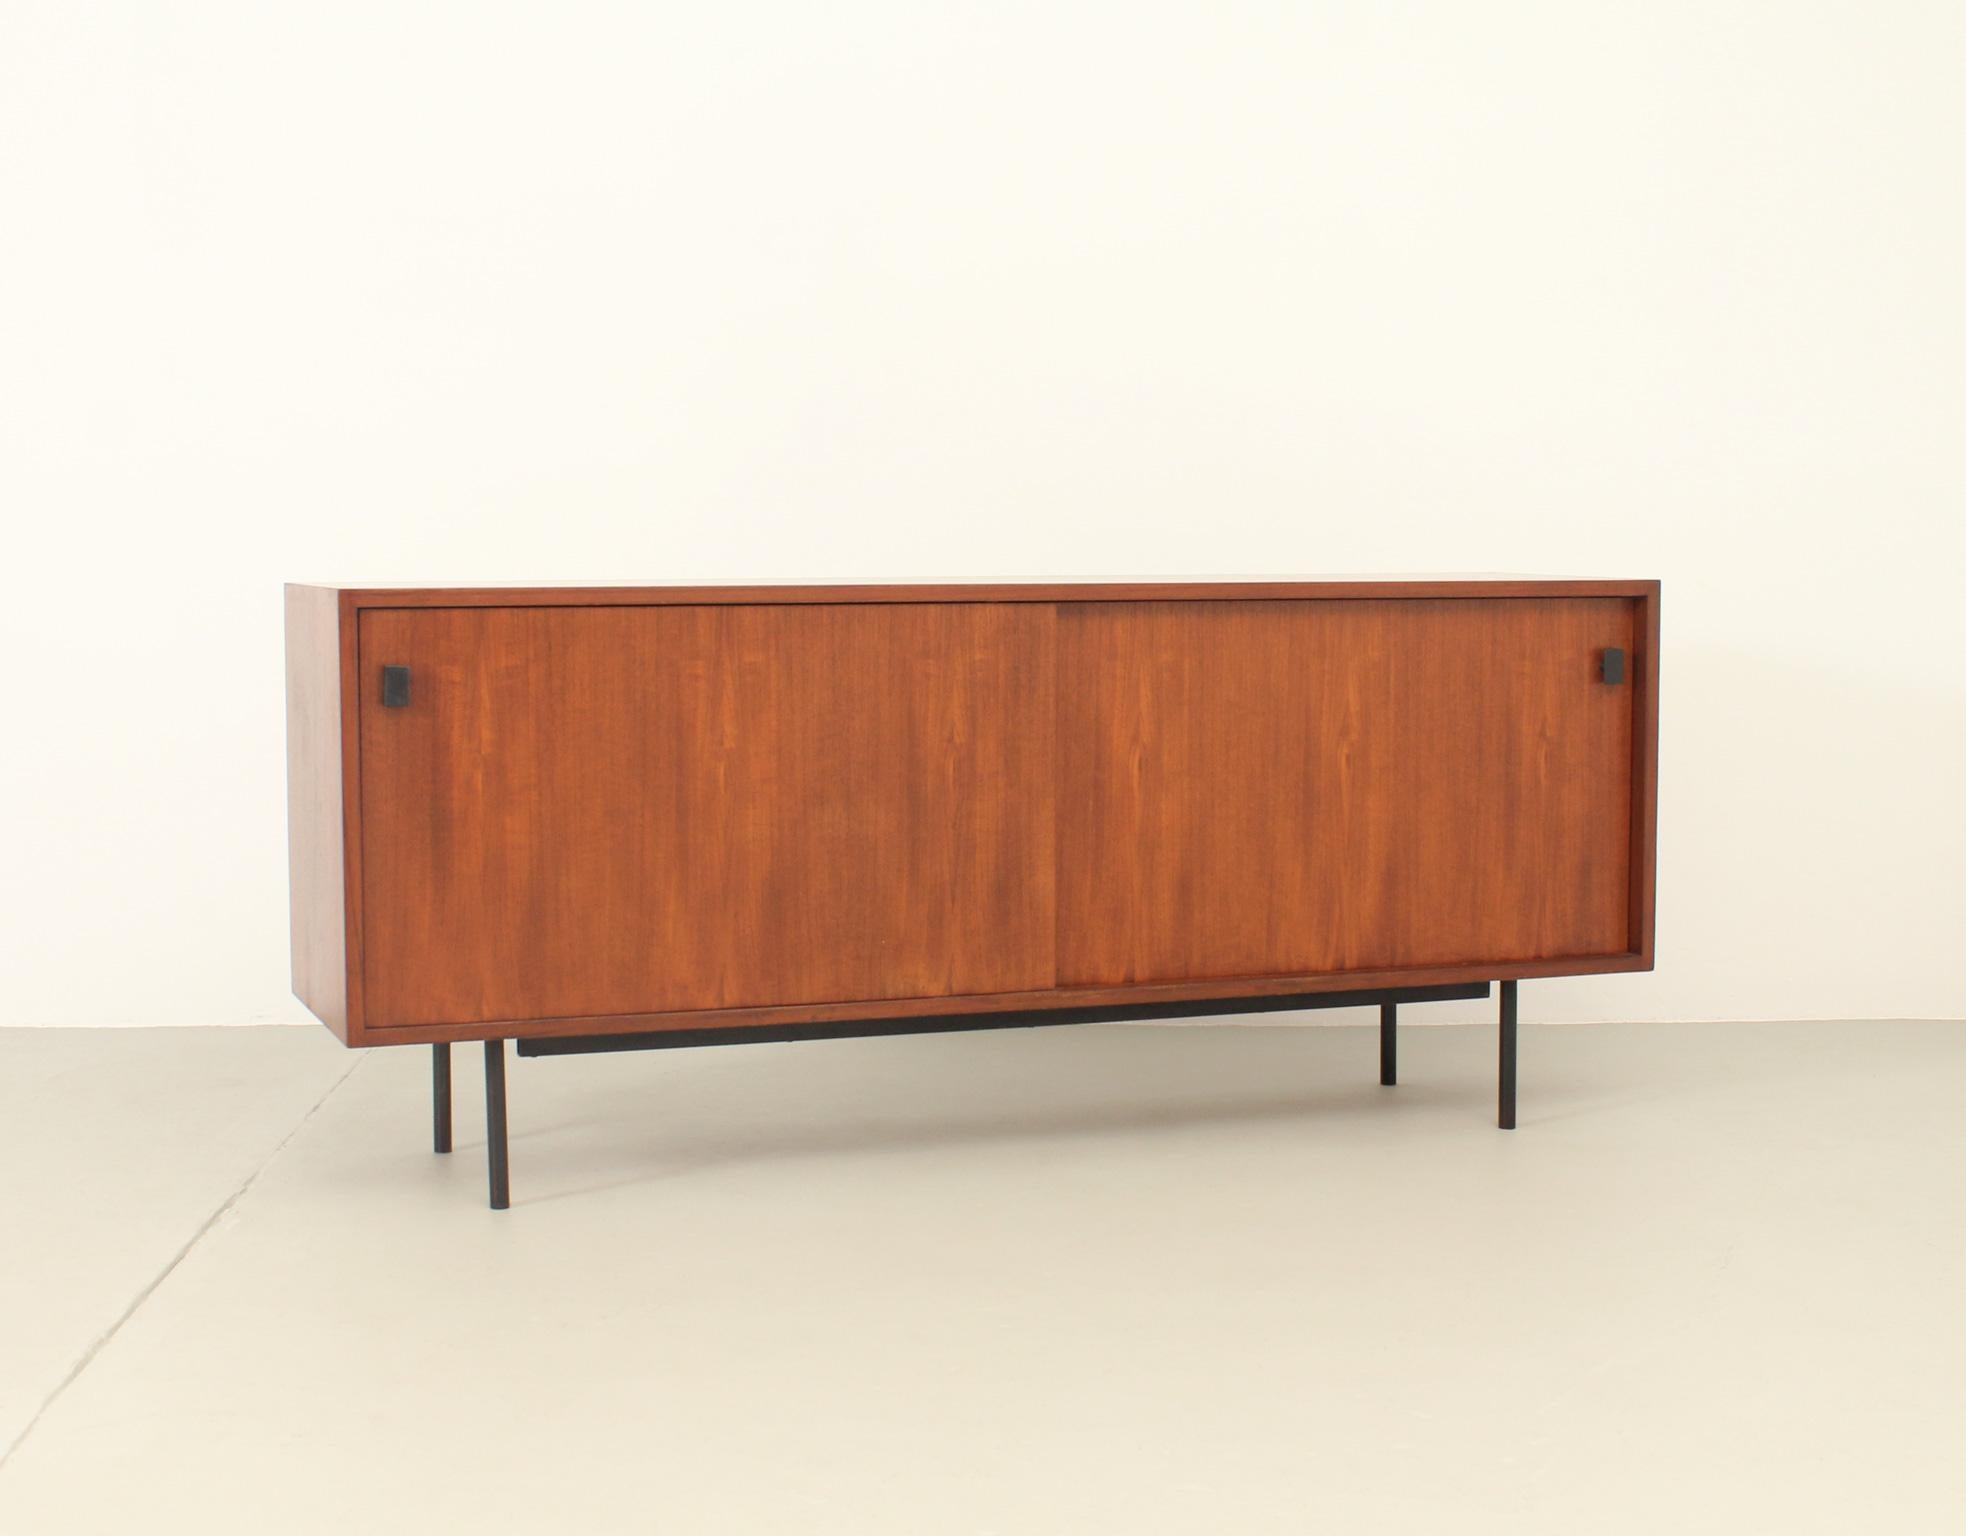 Mid-century sideboard from 1950's probably german or danish design. Minimalistic design with two sliding doors with two small handles in teak wood and black lacquered metal base.